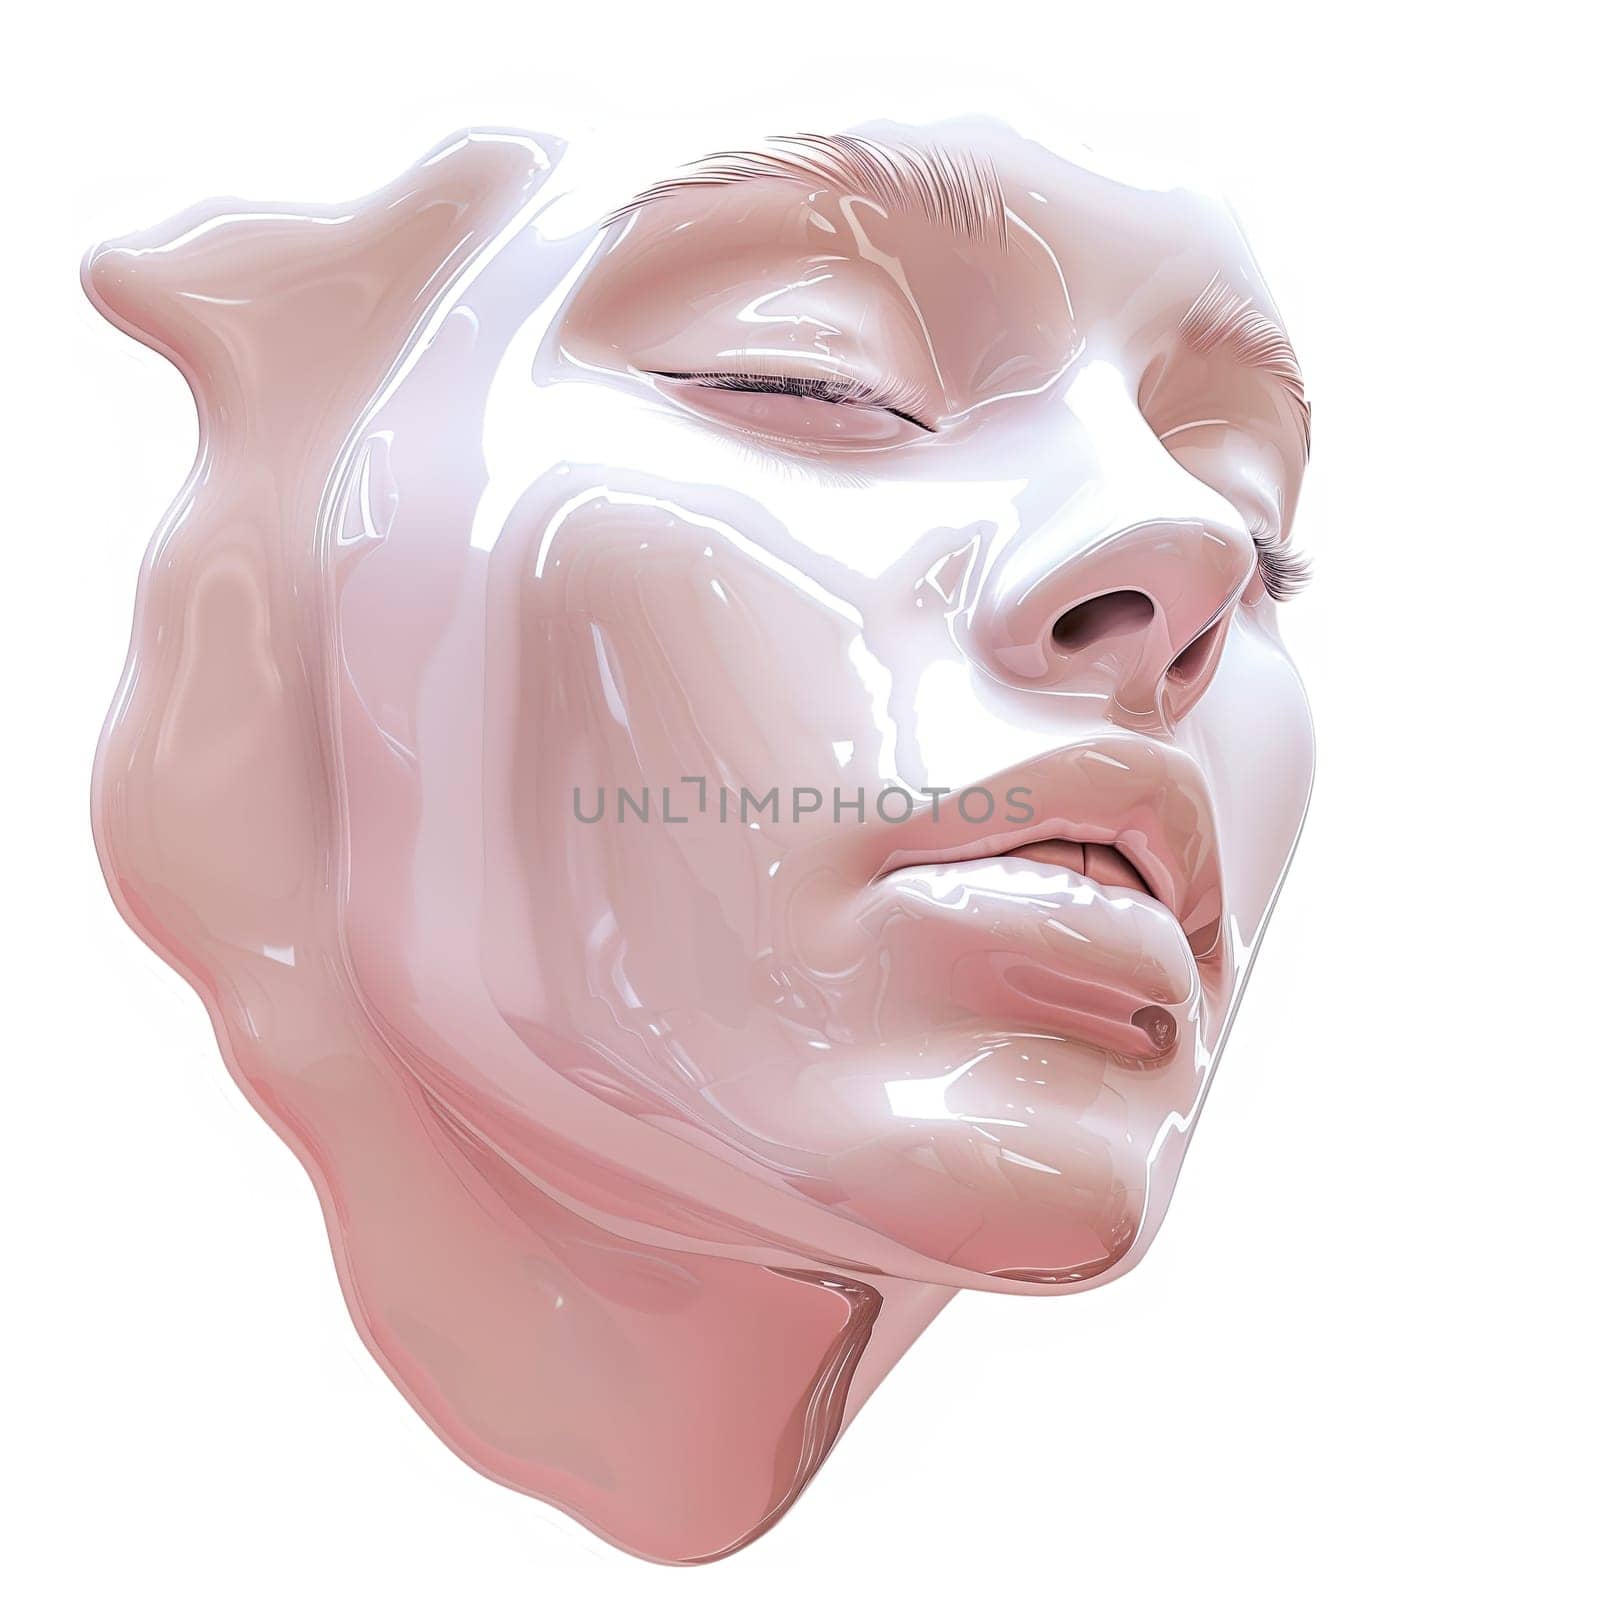 Glossy creamy beauty woman face sculpture cut out by Dustick